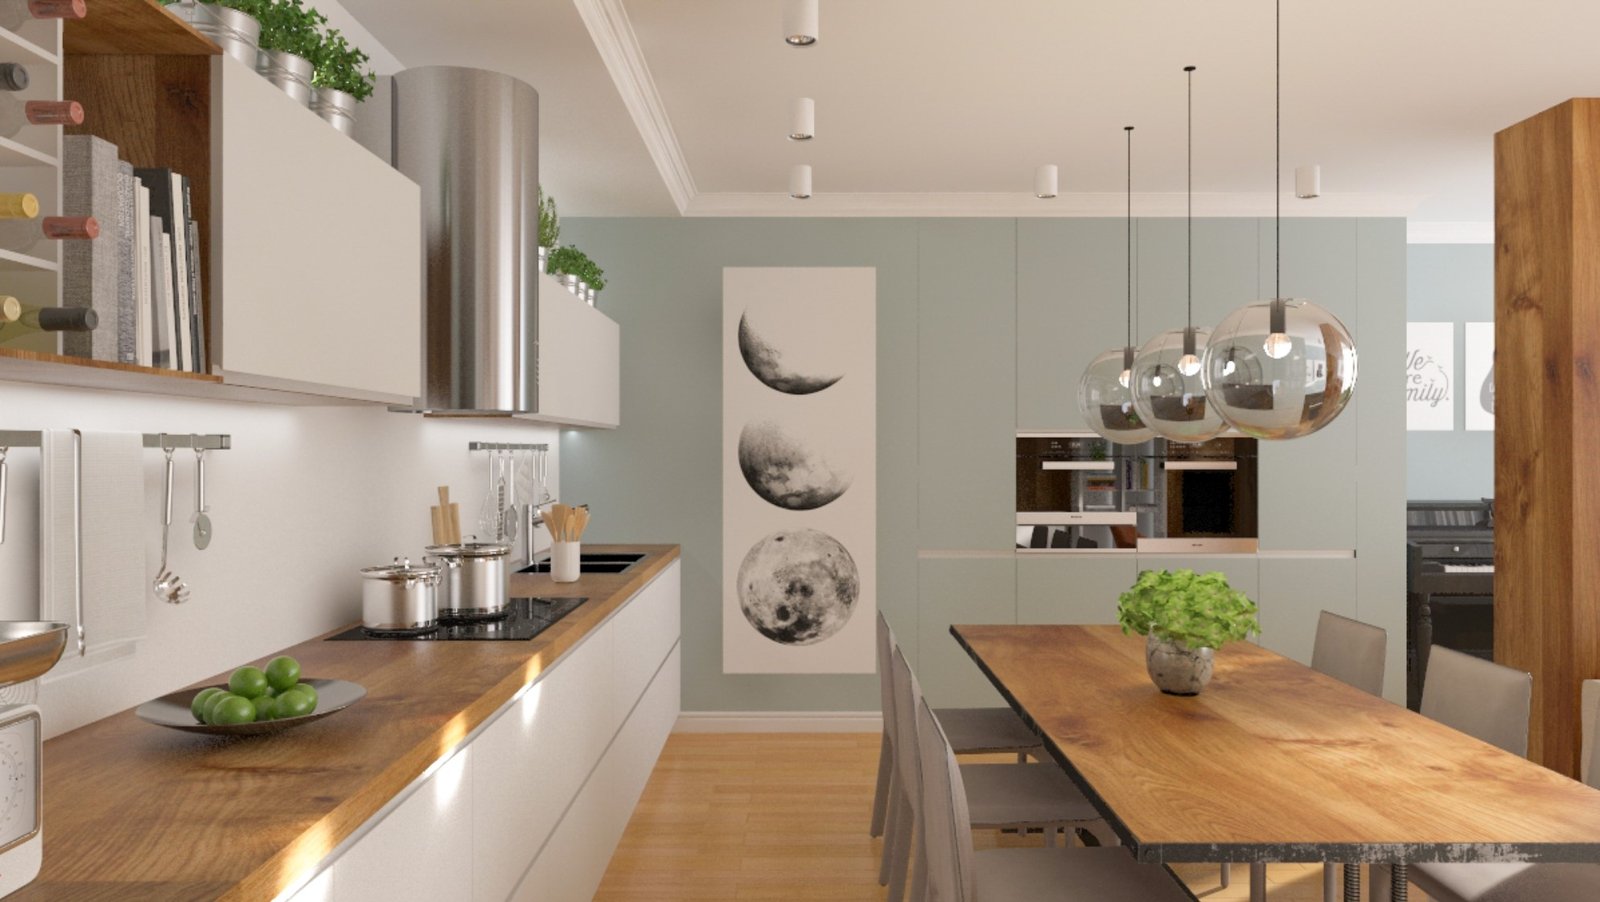 Interior renovation featuring a sleek kitchen design with a wooden countertop, transparent globe pendant lights, and a decorative moon phase wall art.